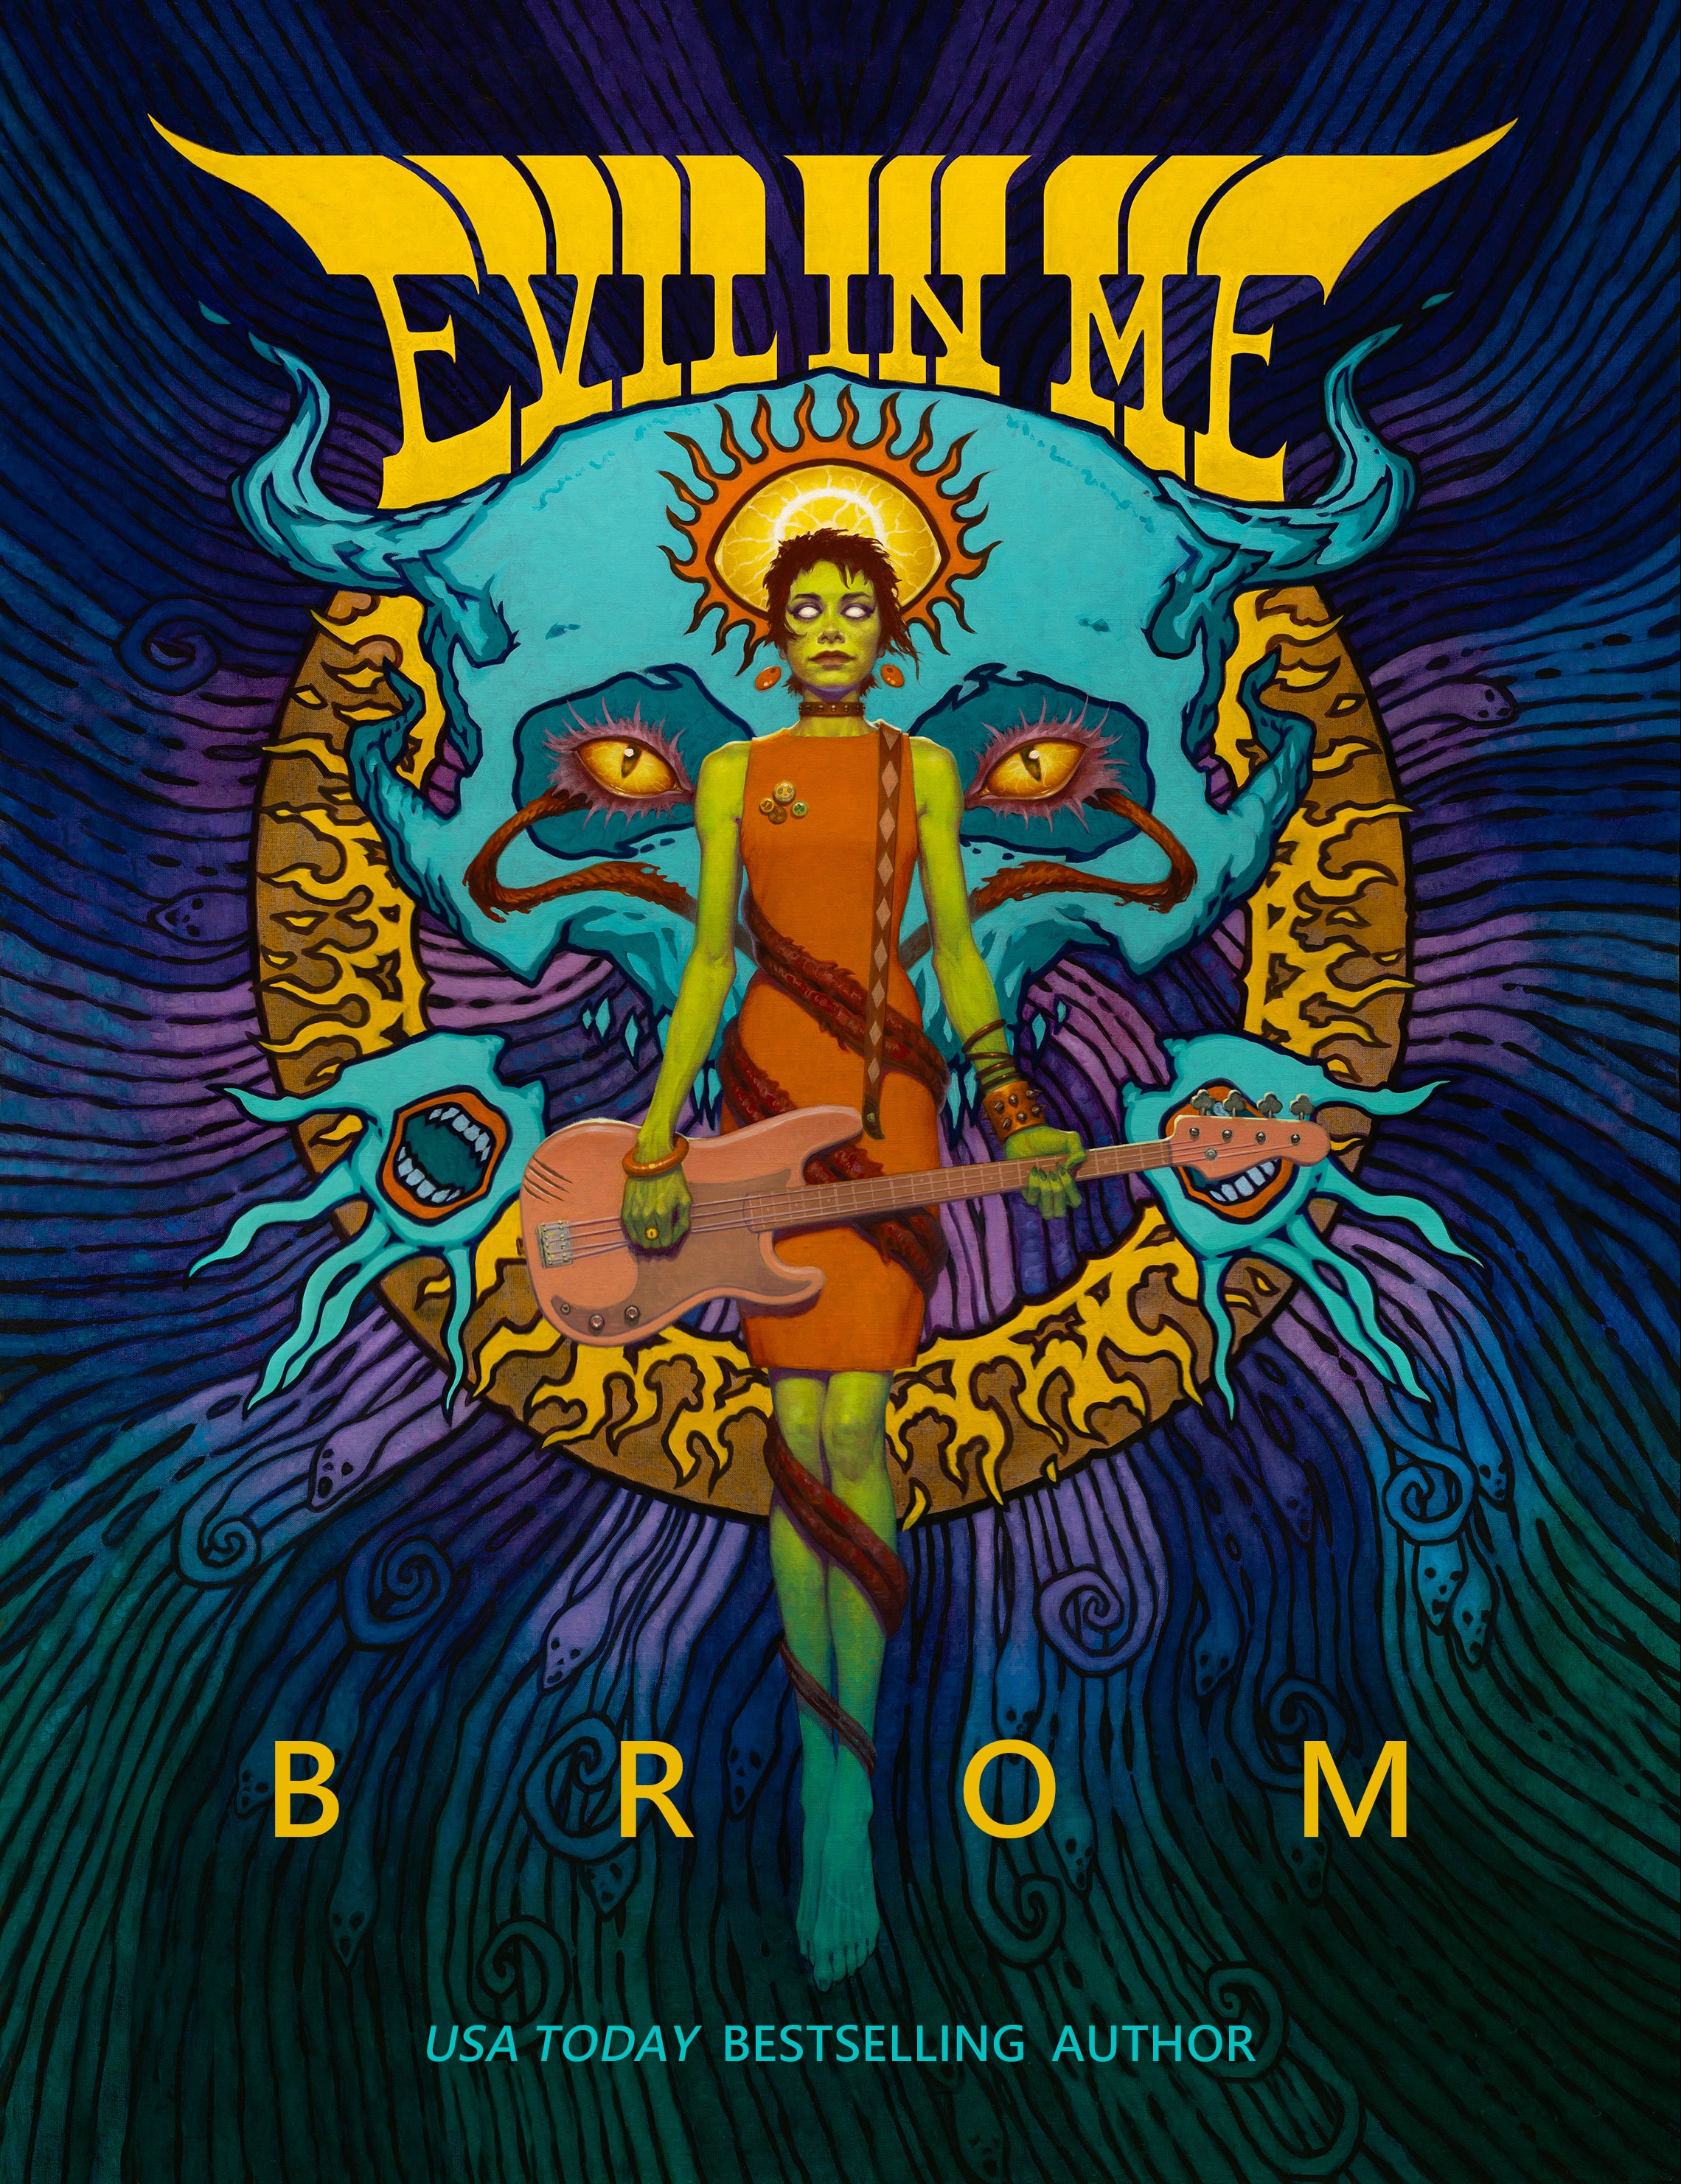 Evil in Me by Brom